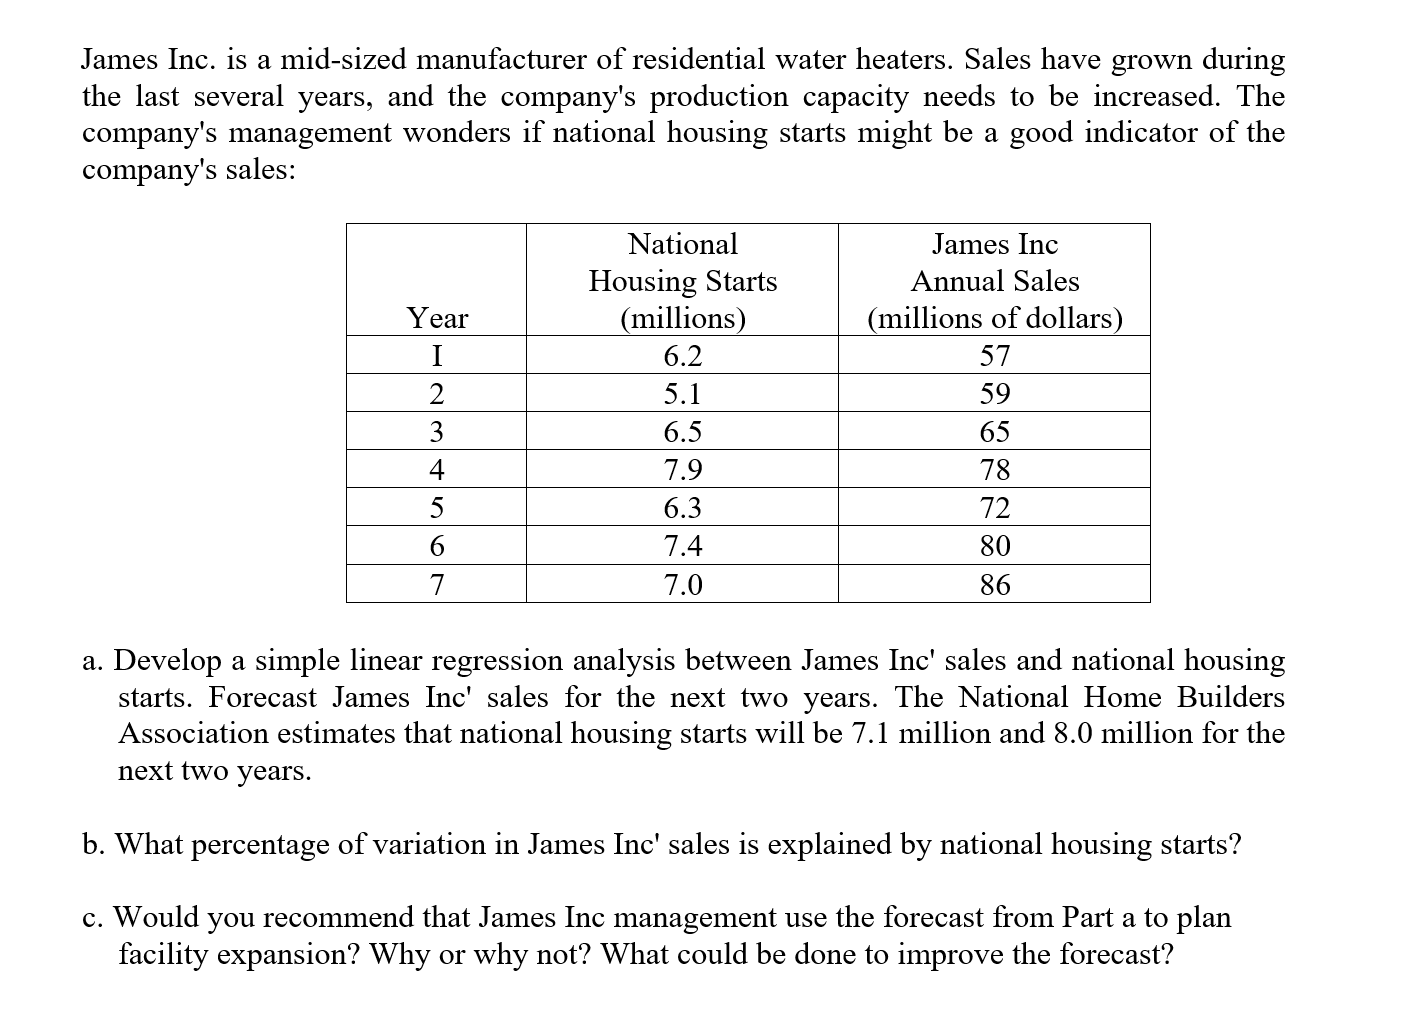 James Inc. is a mid-sized manufacturer of residential water heaters. Sales have grown during
the last several years, and the company's production capacity needs to be increased. The
company's management wonders if national housing starts might be a good indicator of the
company's sales:
National
James Inc
Housing Starts
(millions)
Annual Sales
Year
(millions of dollars)
I
6.2
57
2
5.1
59
3
6.5
65
4
7.9
78
5
6.3
72
6
7.4
80
7
7.0
86
a. Develop a simple linear regression analysis between James Inc' sales and national housing
starts. Forecast James Inc' sales for the next two years. The National Home Builders
Association estimates that national housing starts will be 7.1 million and 8.0 million for the
next two years.
b. What percentage of variation in James Inc' sales is explained by national housing starts?
c. Would you recommend that James Inc management use the forecast from Part a to plan
facility expansion? Why or why not? What could be done to improve the forecast?
